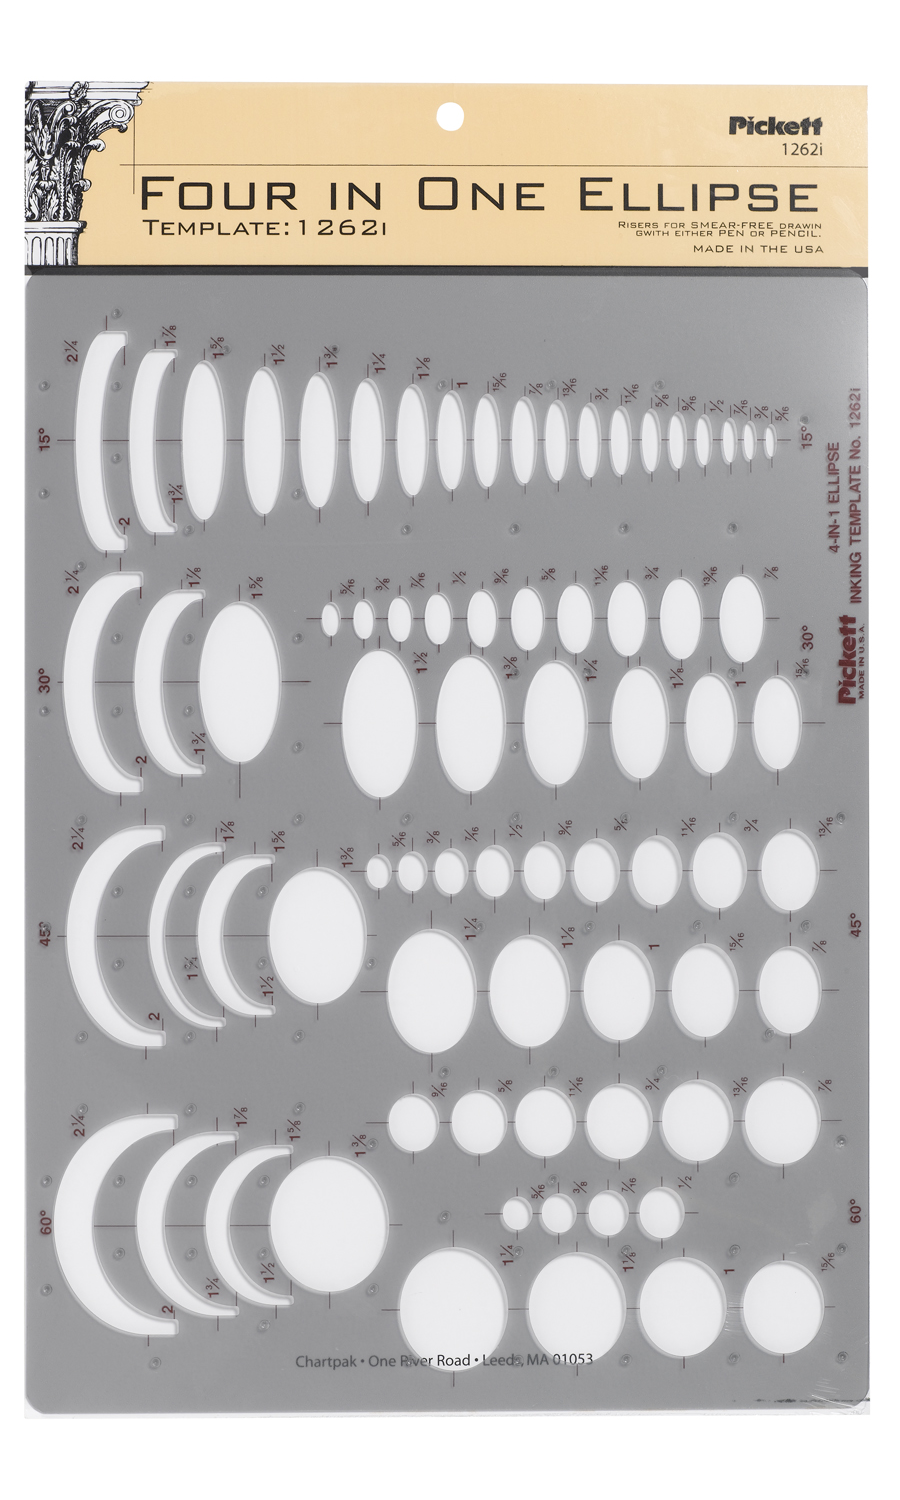 Four-In-One Ellipse Template